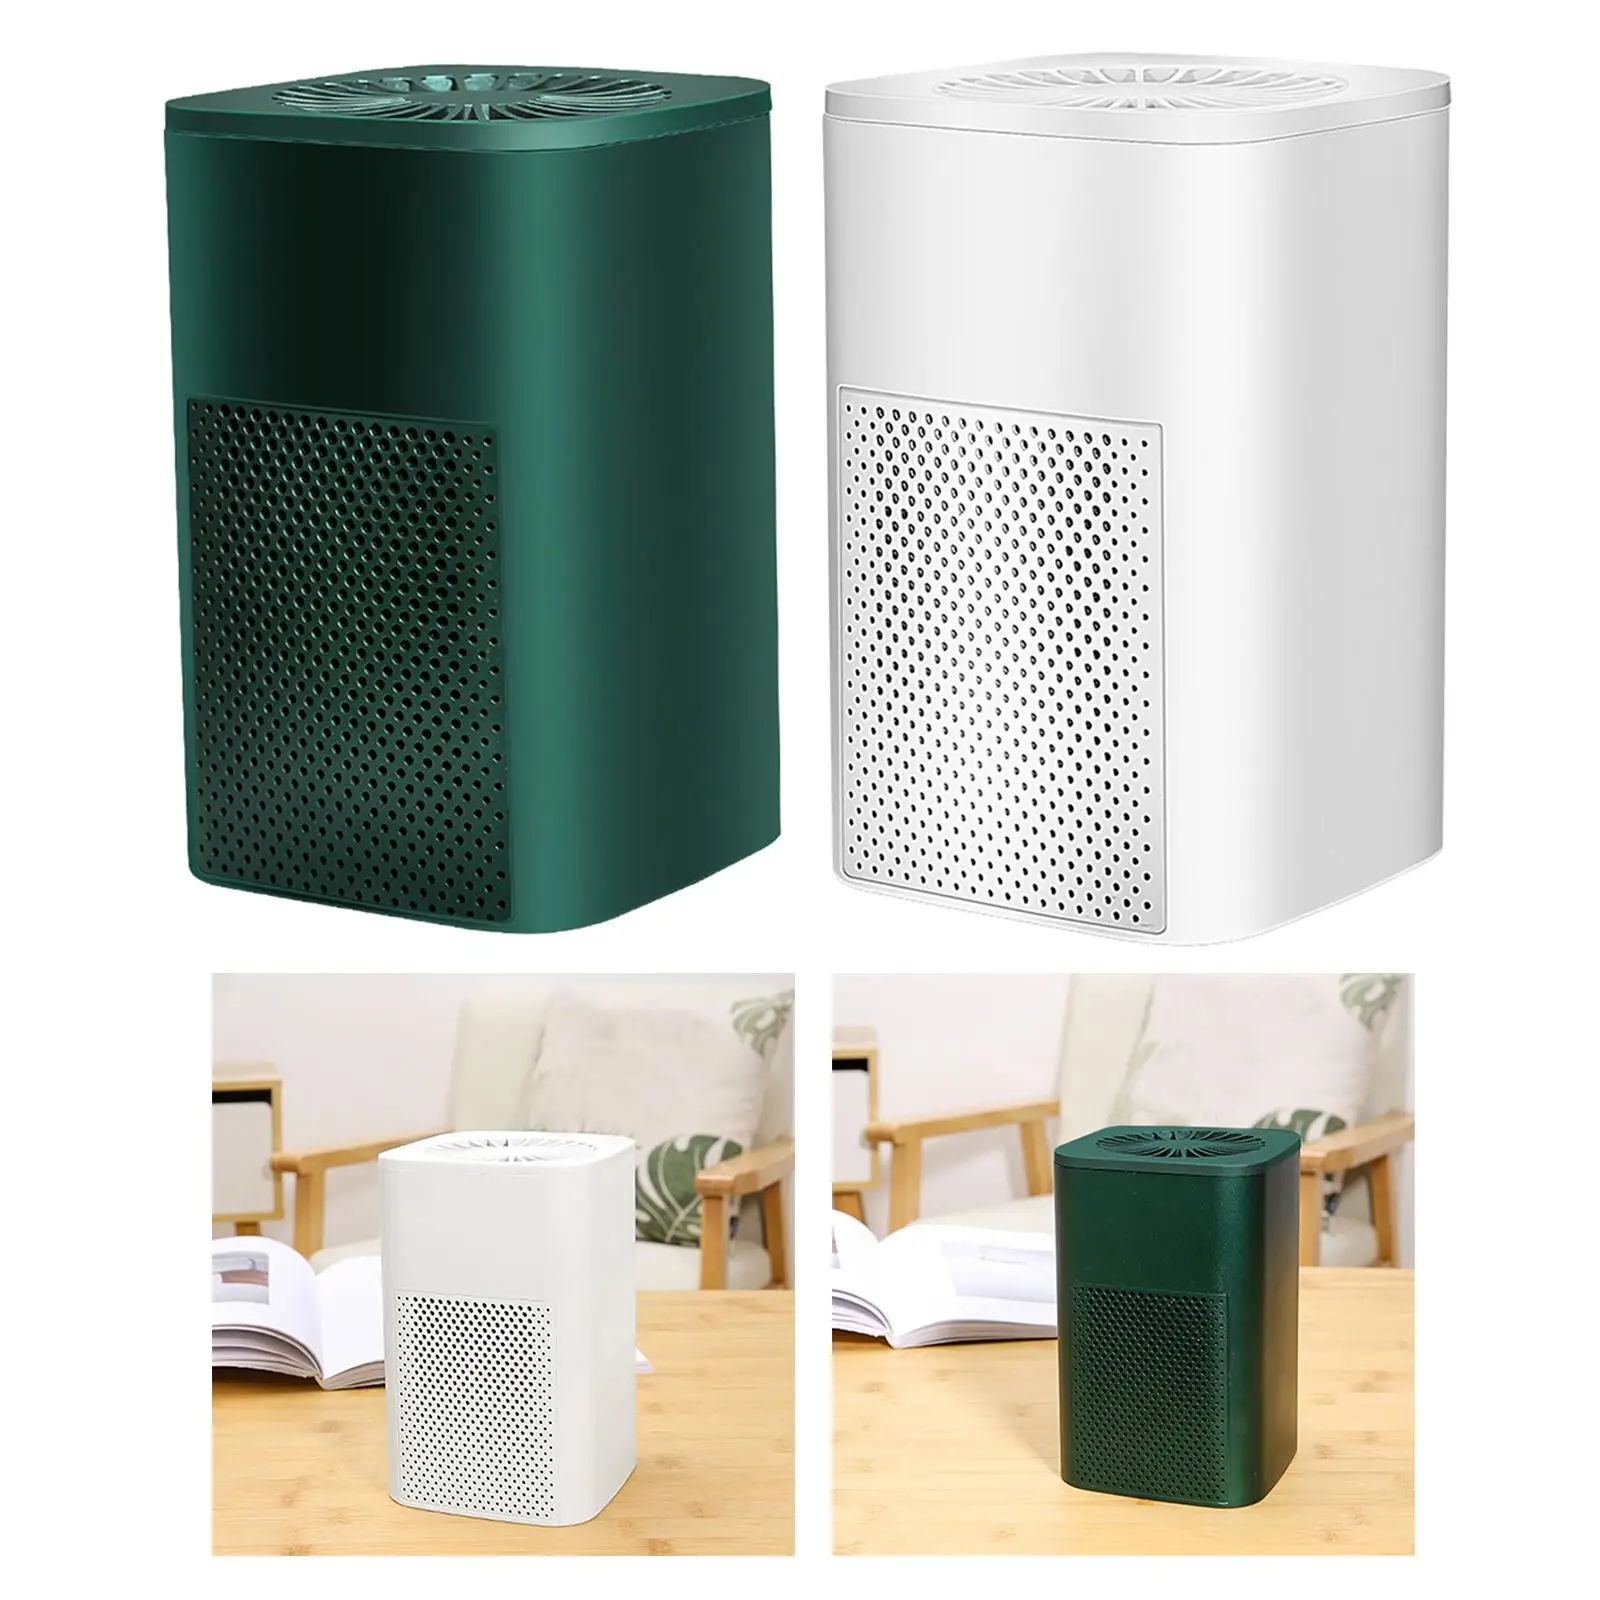 Portable Mini Air Purifier Activated Carbon Quiet Office Travel 35dB Car Air Cleaner Removes Odor Particles Pet Allergies Pollen